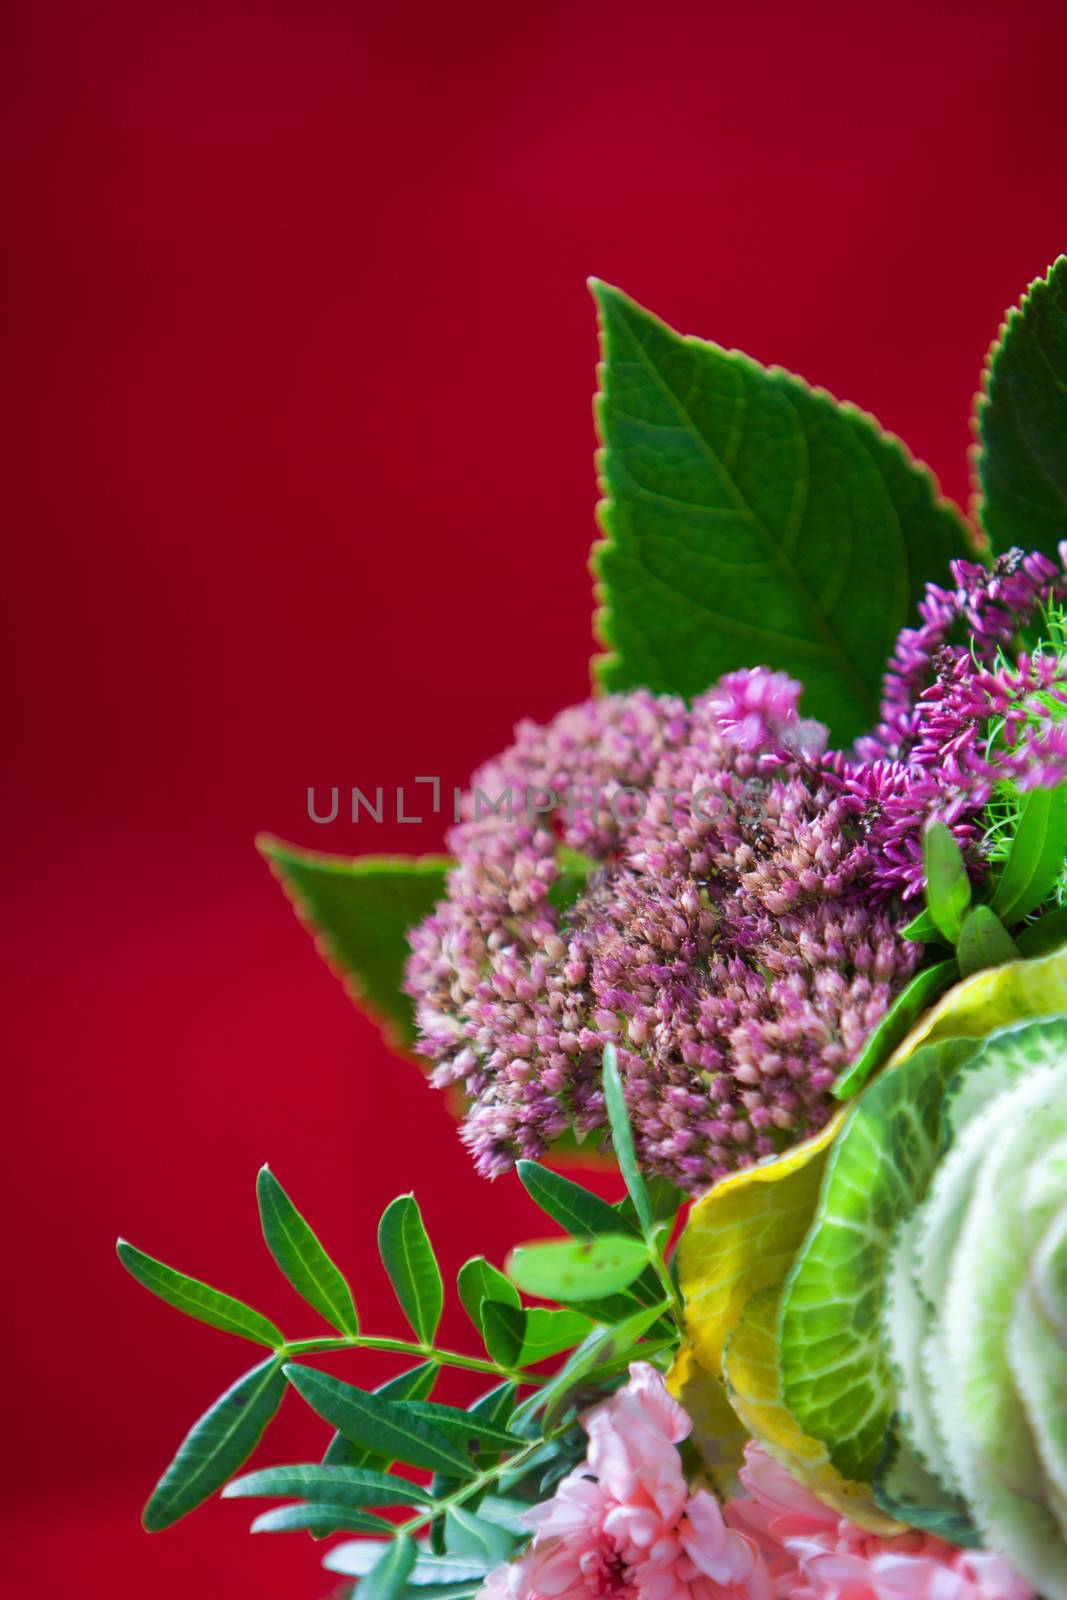 Festive flower arrangement with pink flowers and large green leaves with shallow dof against a deep red background with copyspace